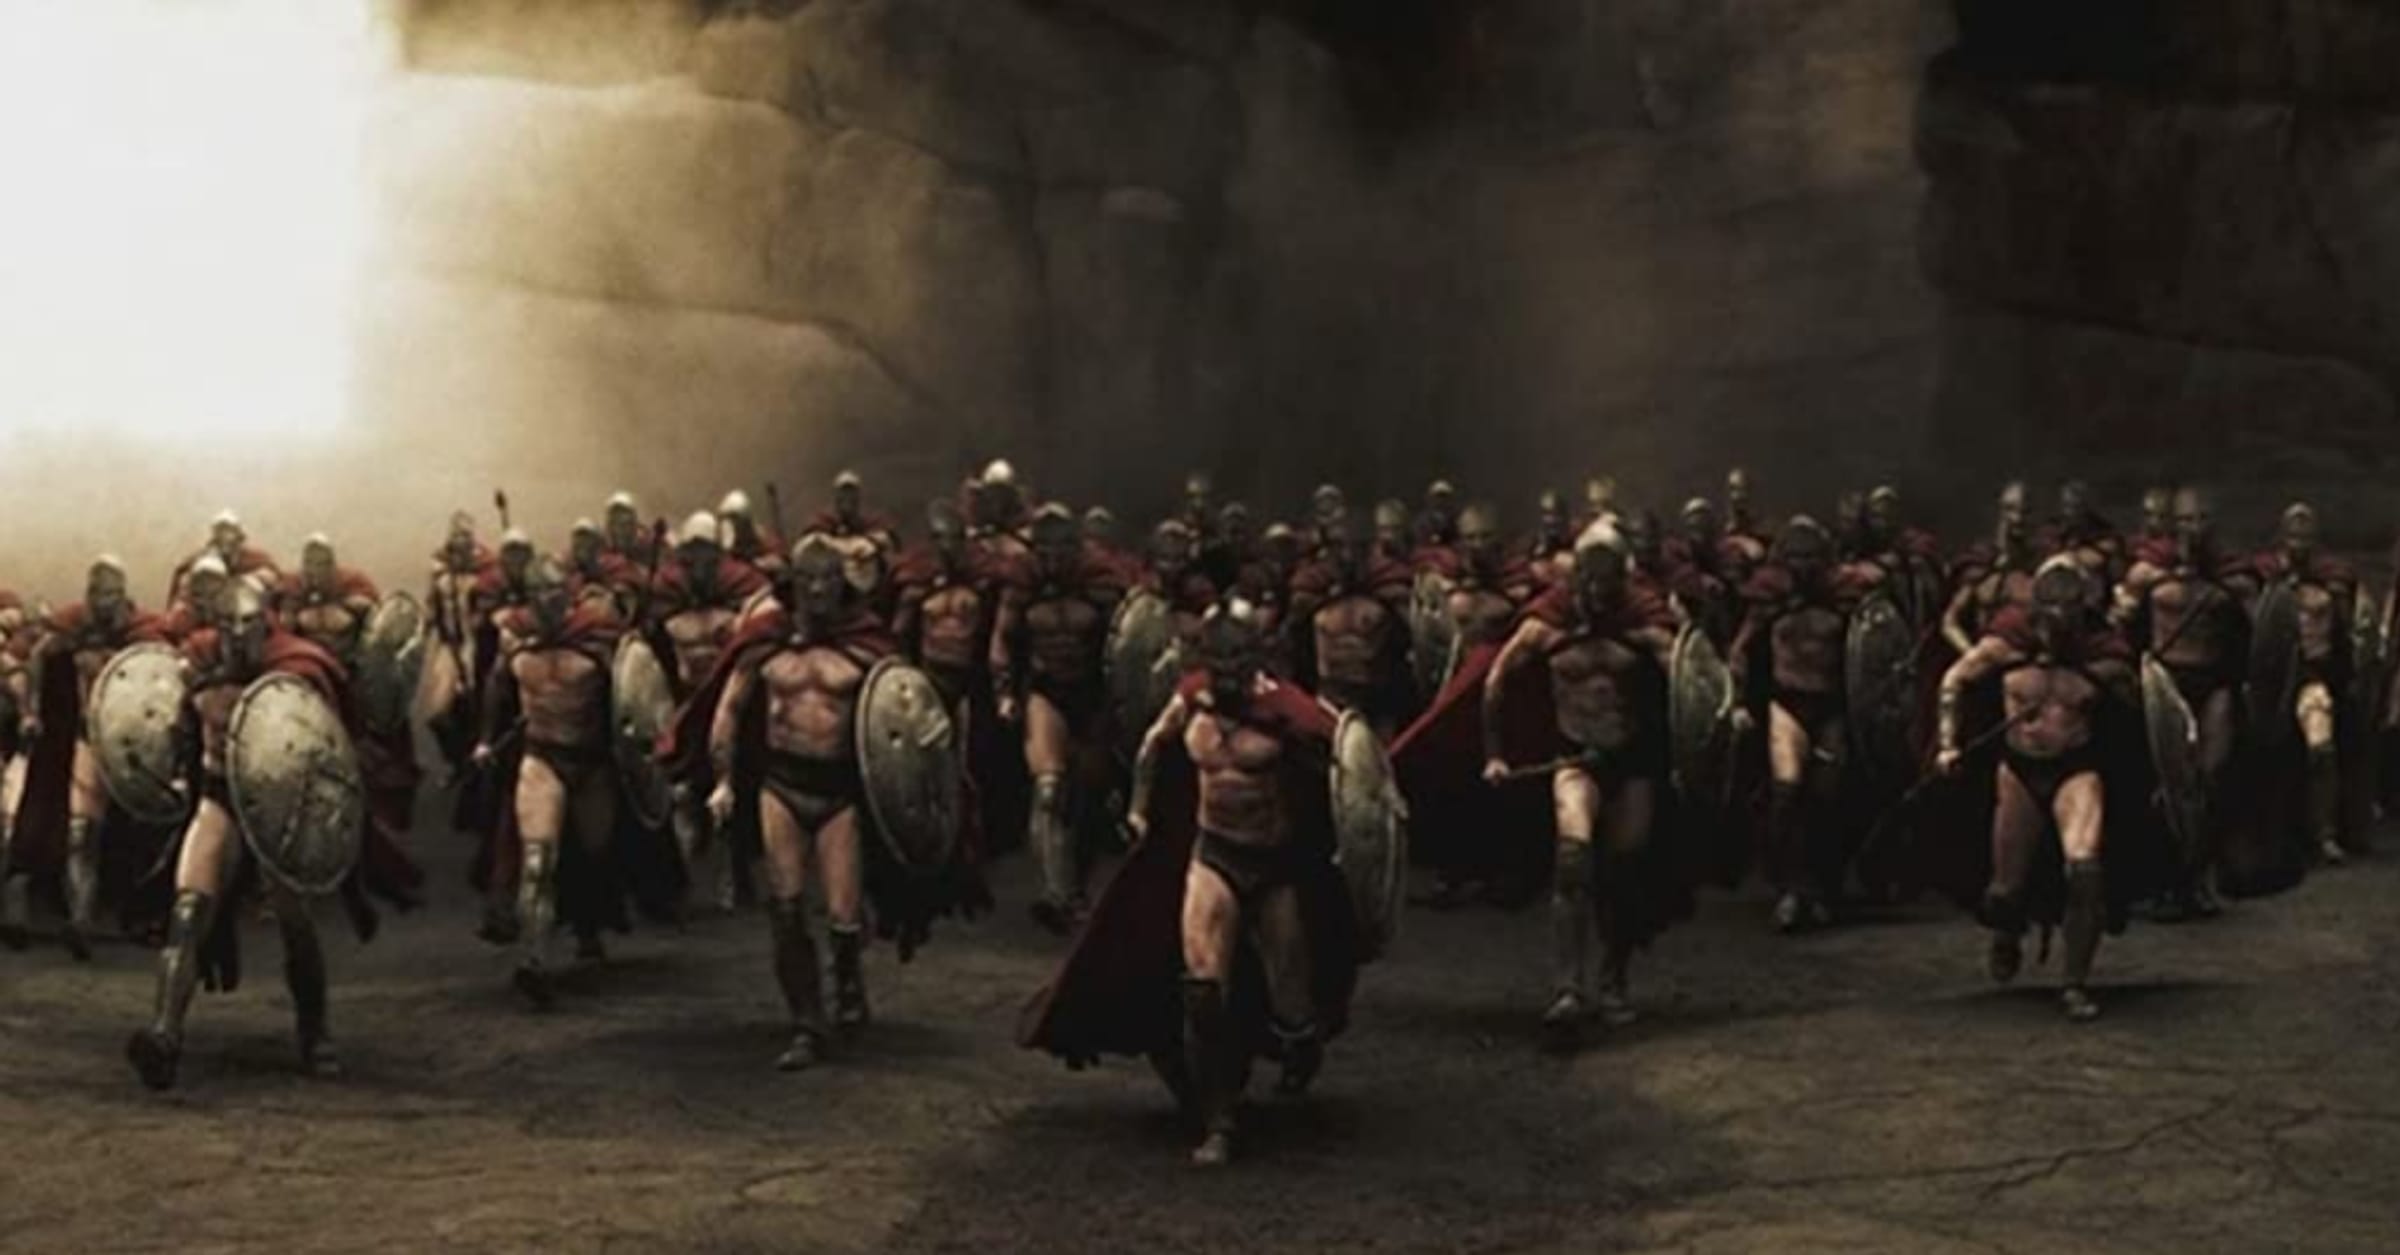 What is the historical accuracy of the movie '300'? Did the Spartans  participate in The Greco-Persian Wars or were they allies of Athens during  them, as depicted in the film? - Quora